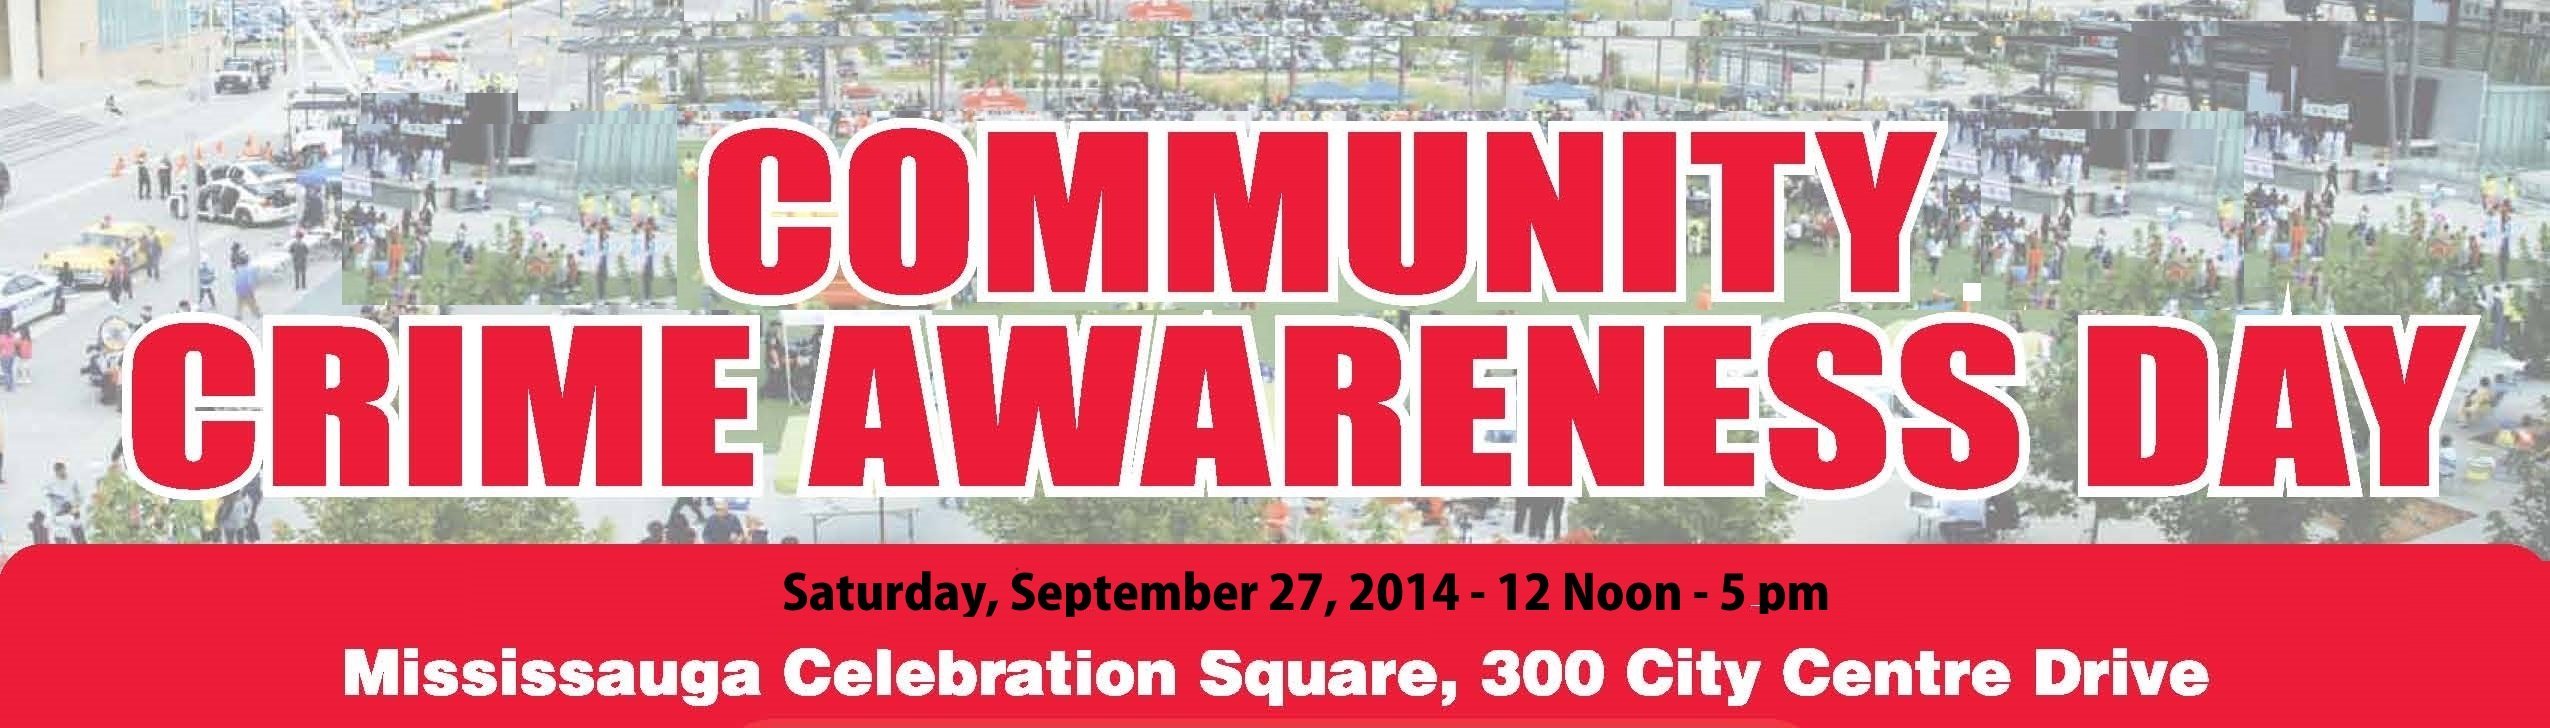 Community Crime Awareness Day adapted image from http://www.crimeawareness.ca/event.php